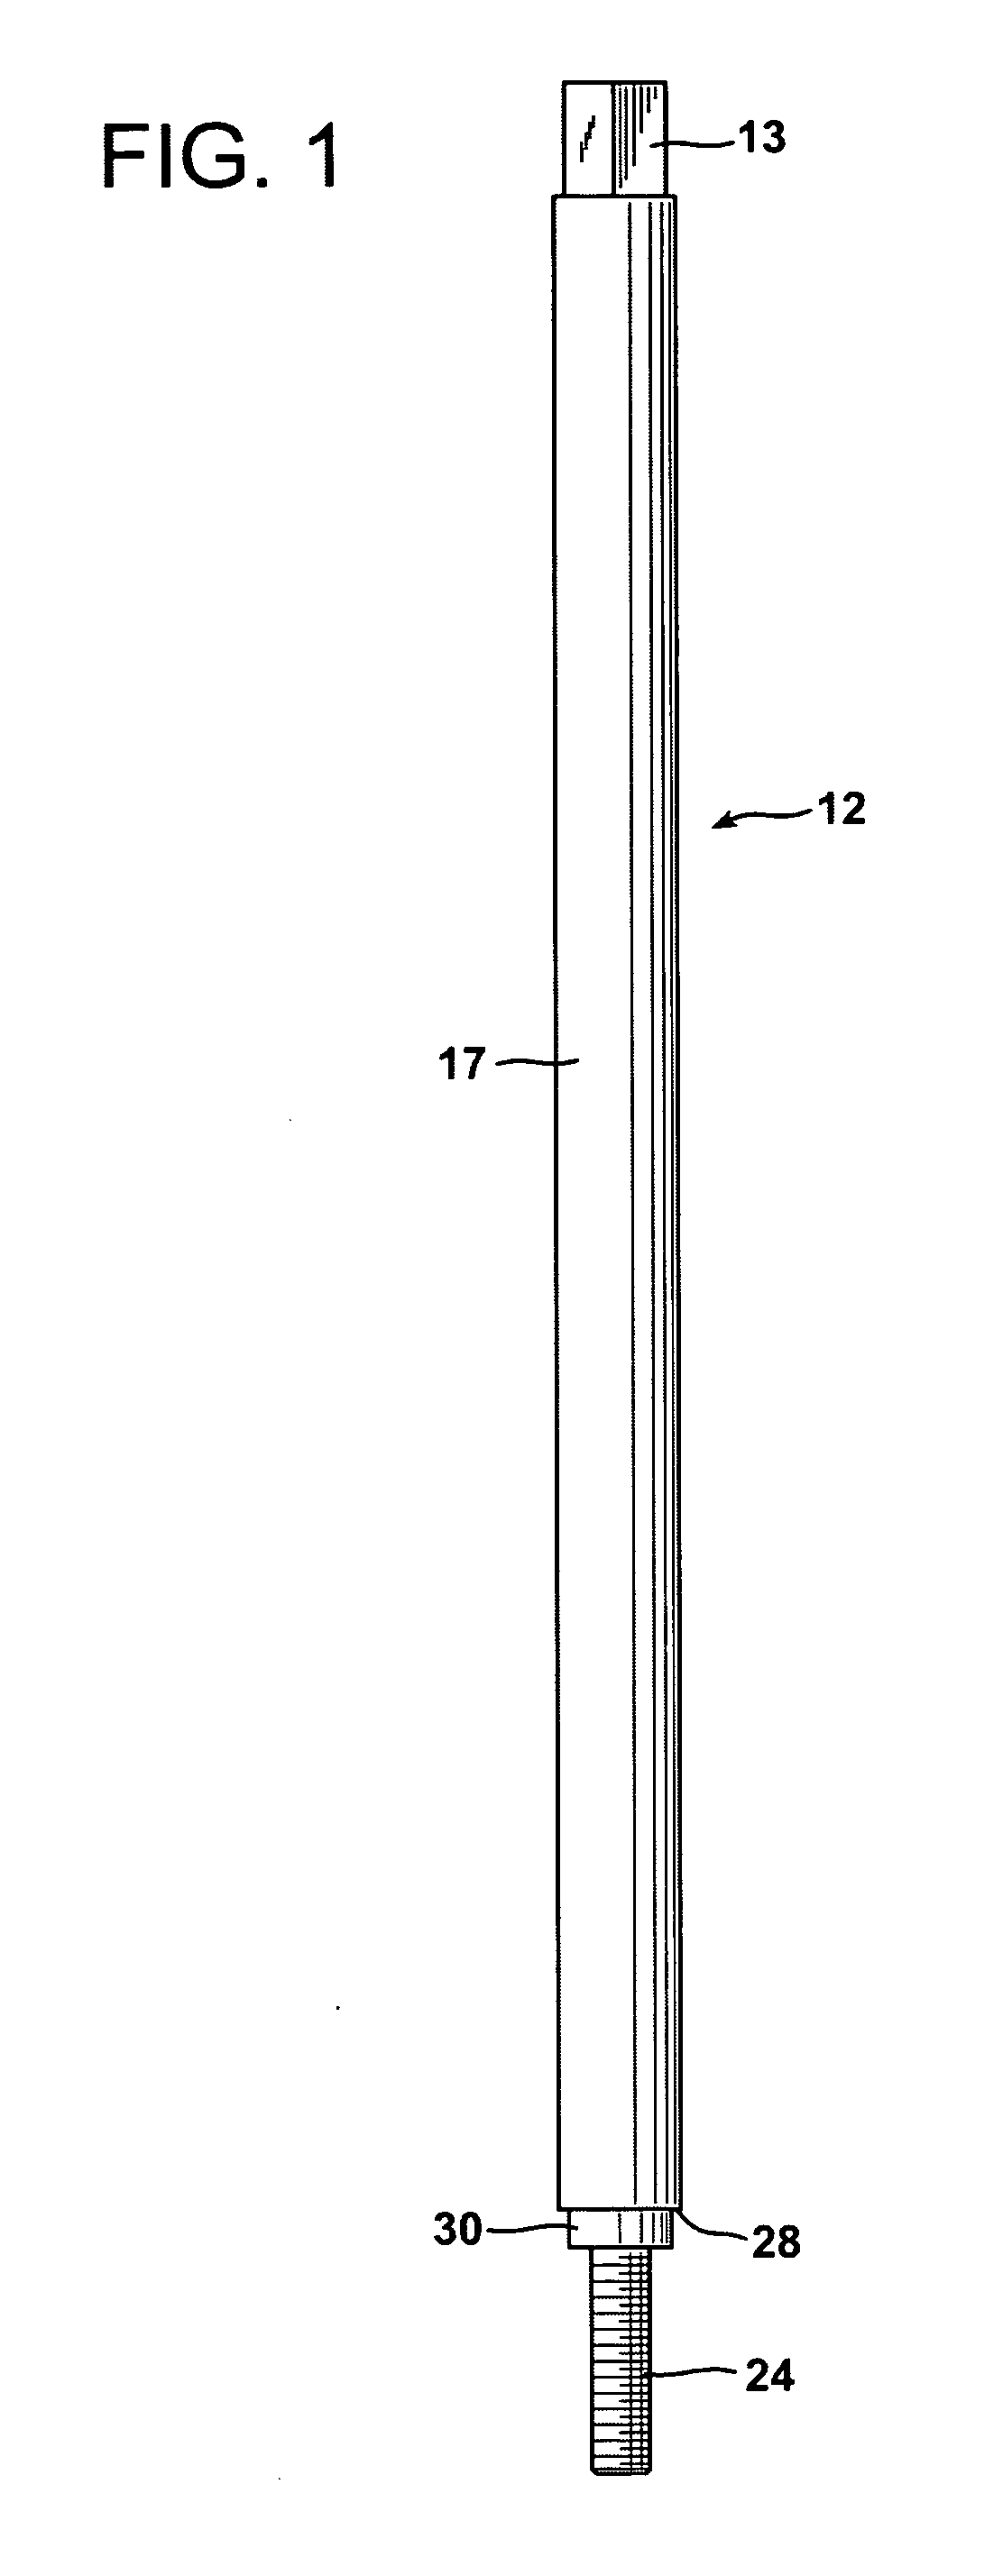 Hole coring system with lever arm